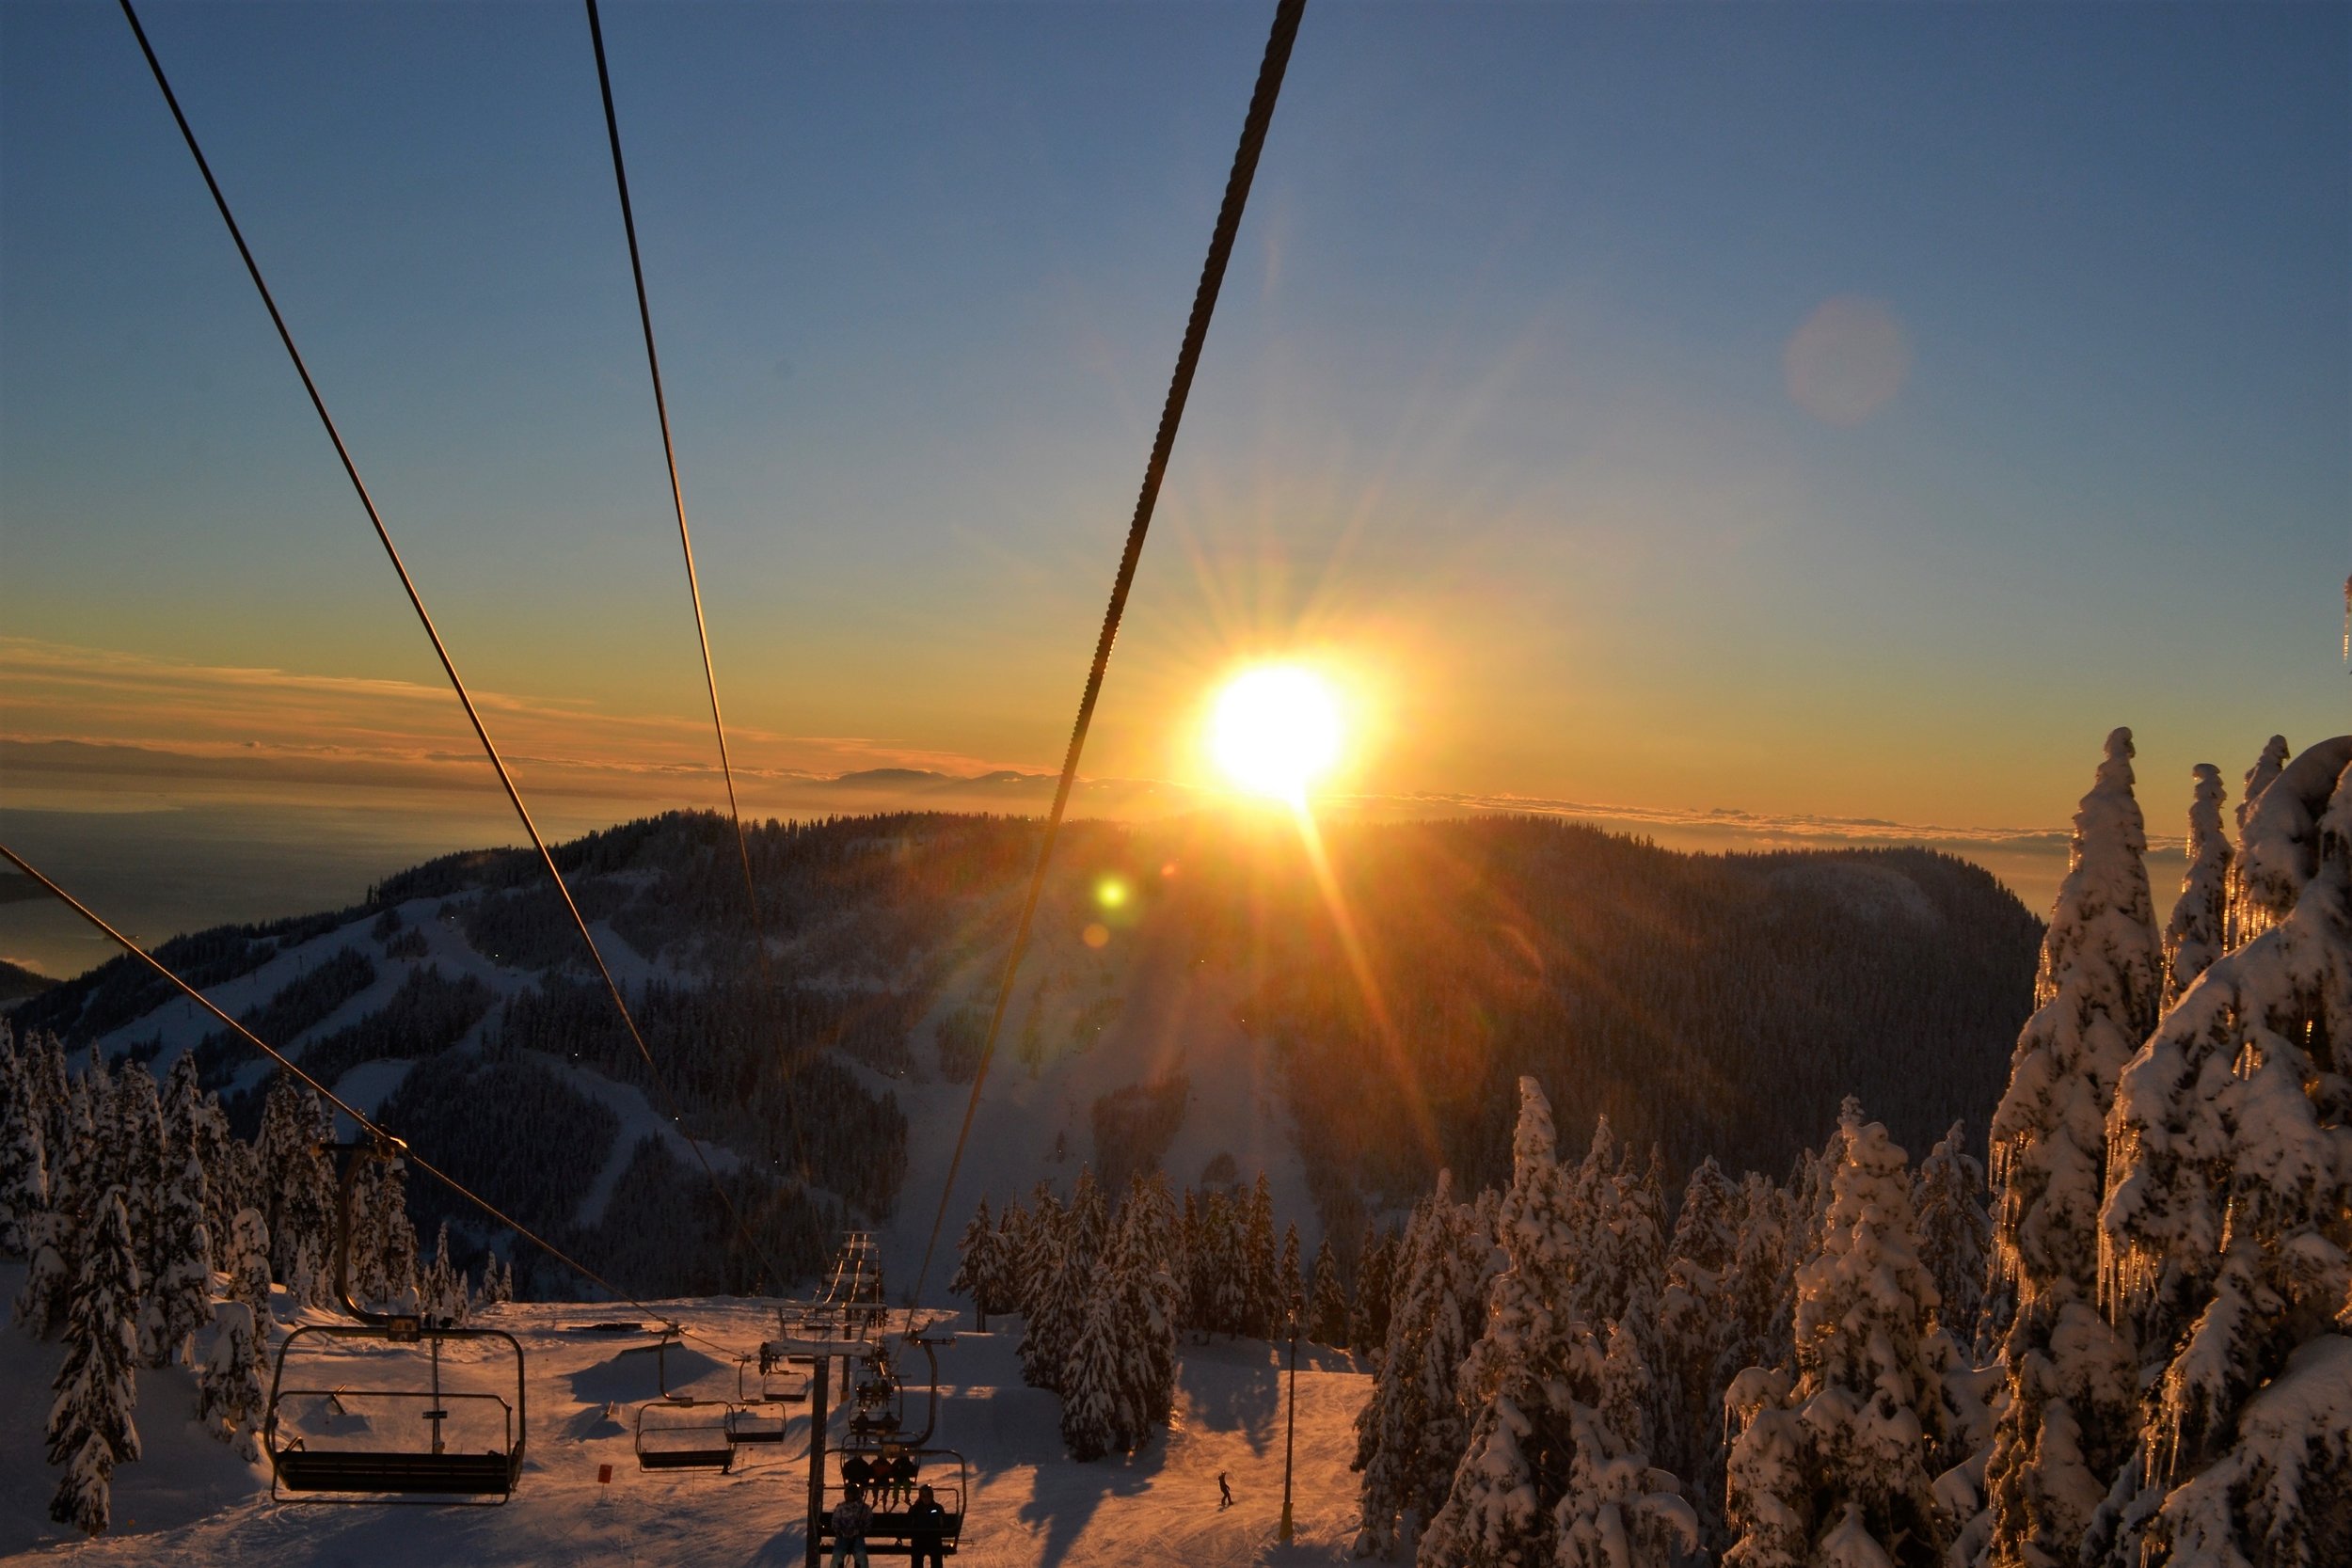 A great view of the sunset from the chairlift at the local mountains in Vancouver